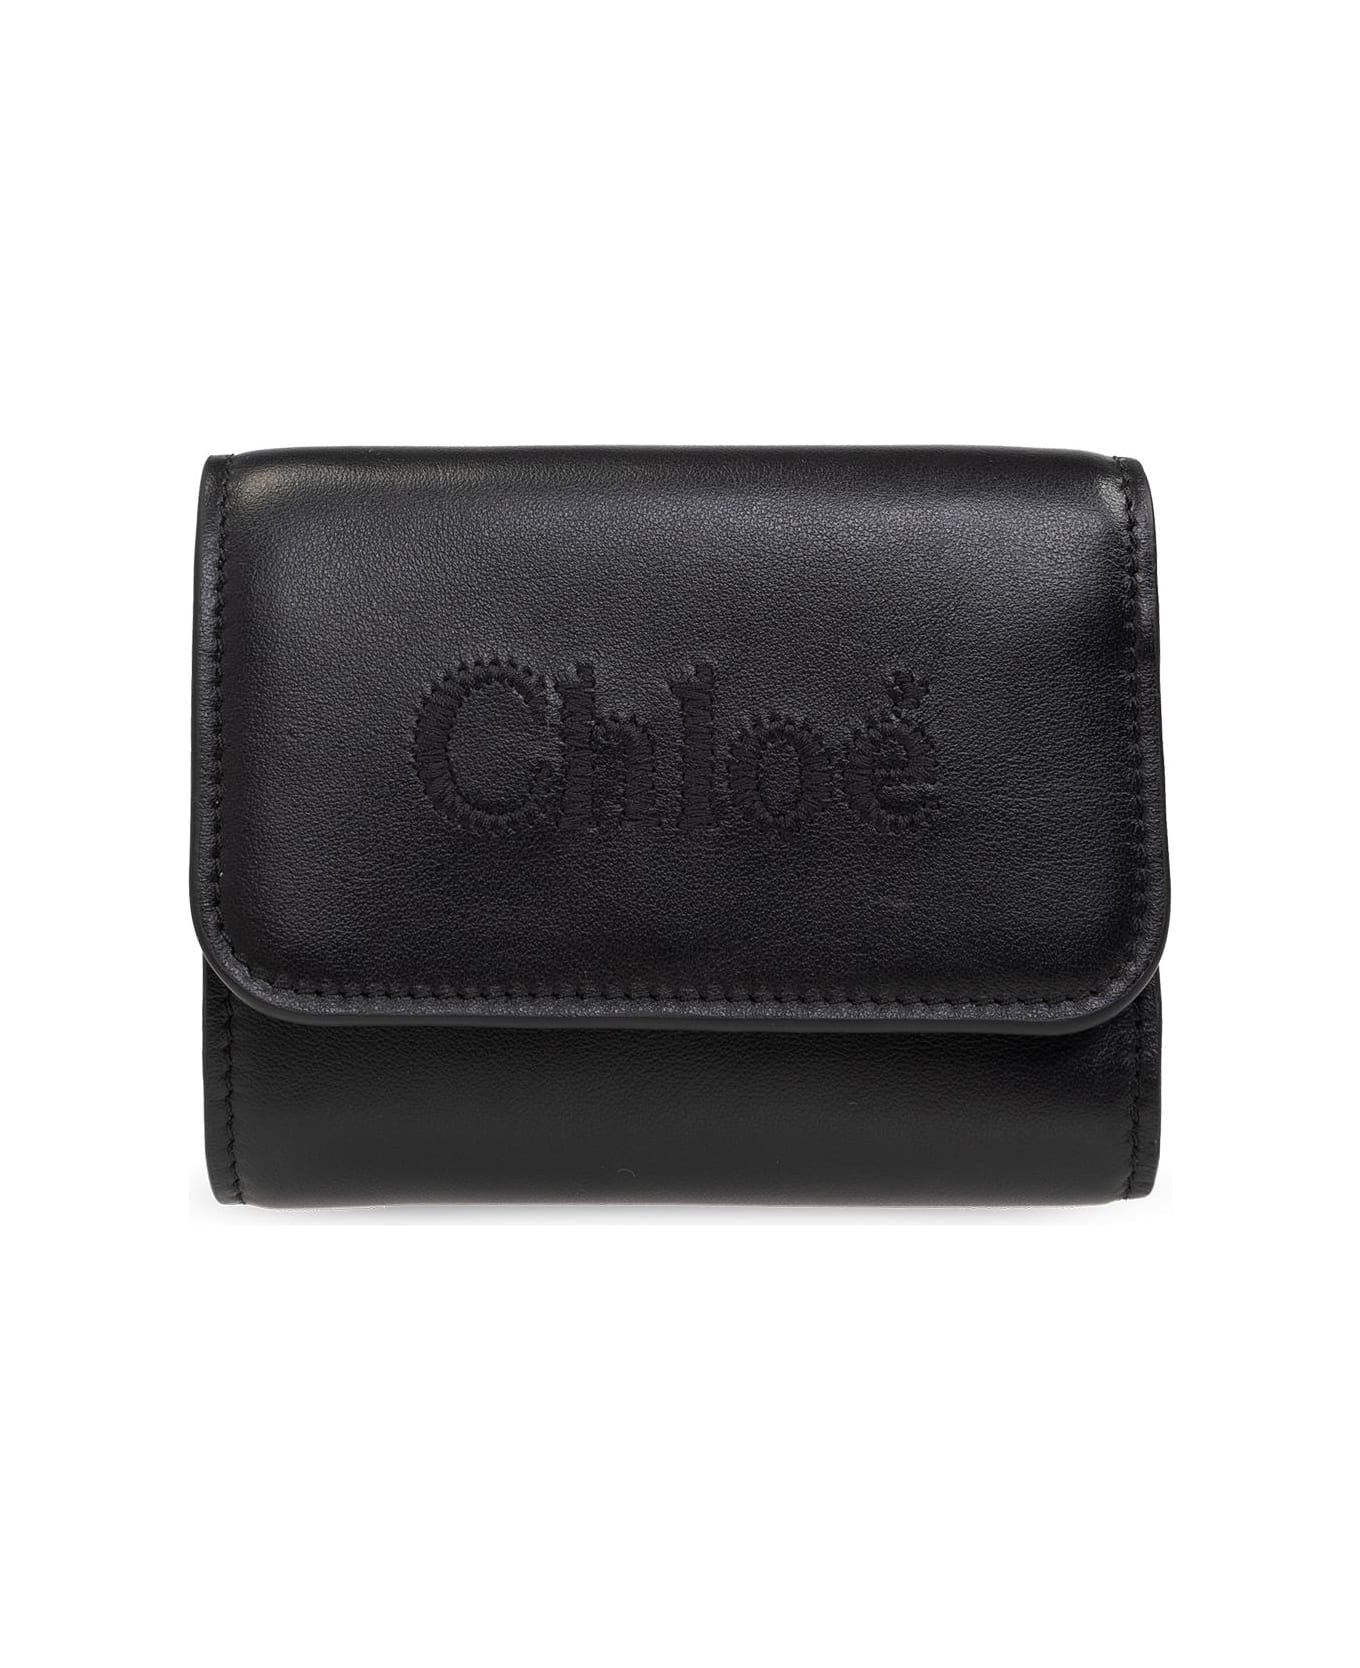 Chloé Leather Wallet With Logo - Black 財布